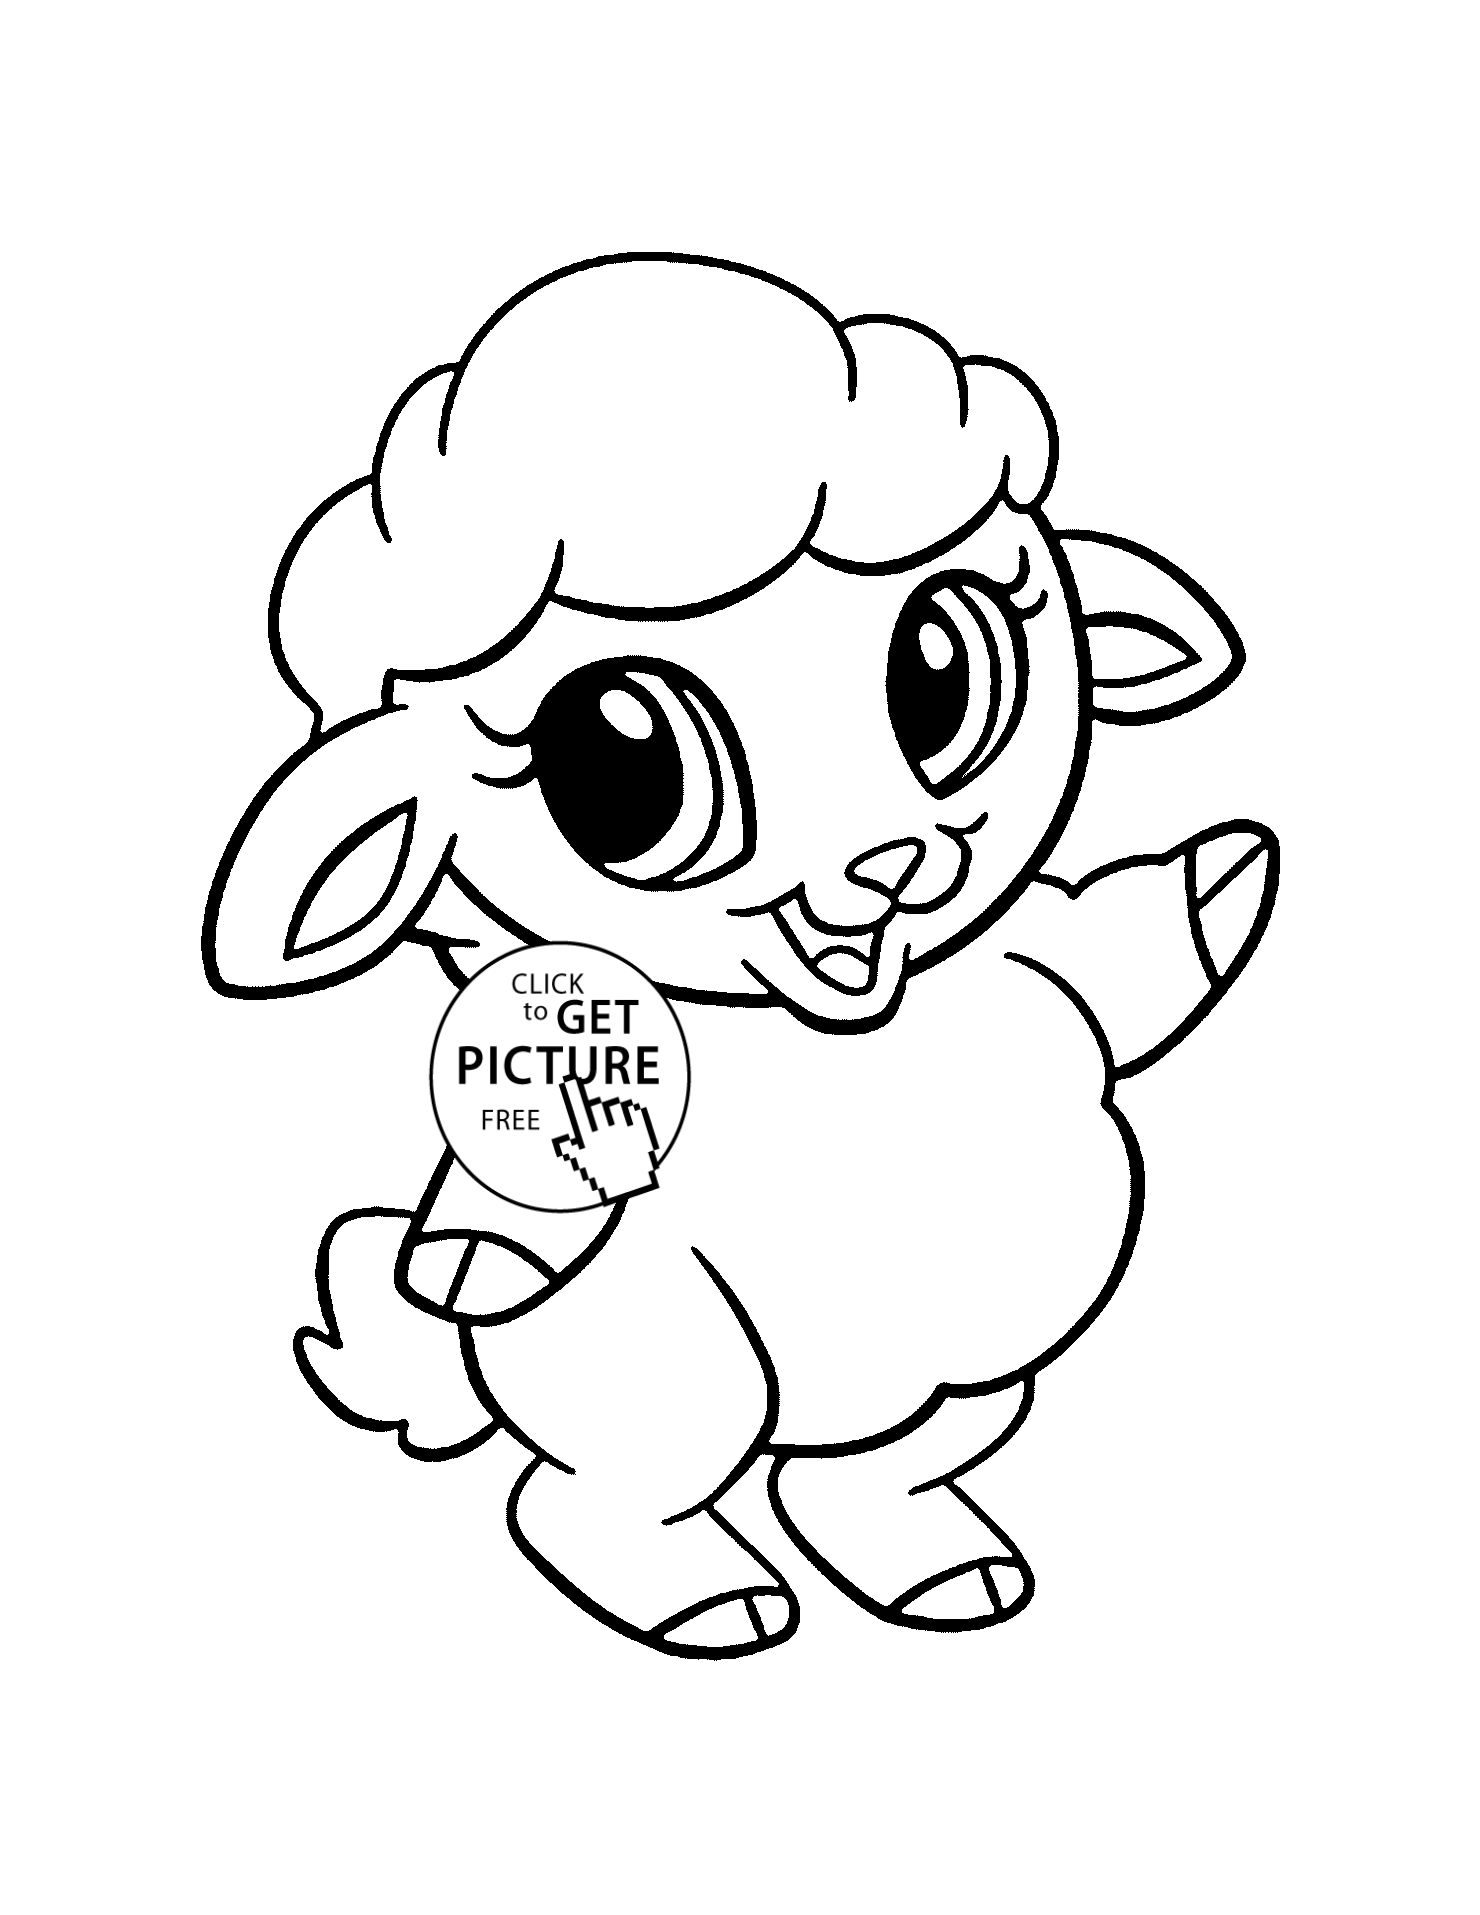 baby animals to color baby sheep animal coloring page for kids animal coloring baby animals to color 